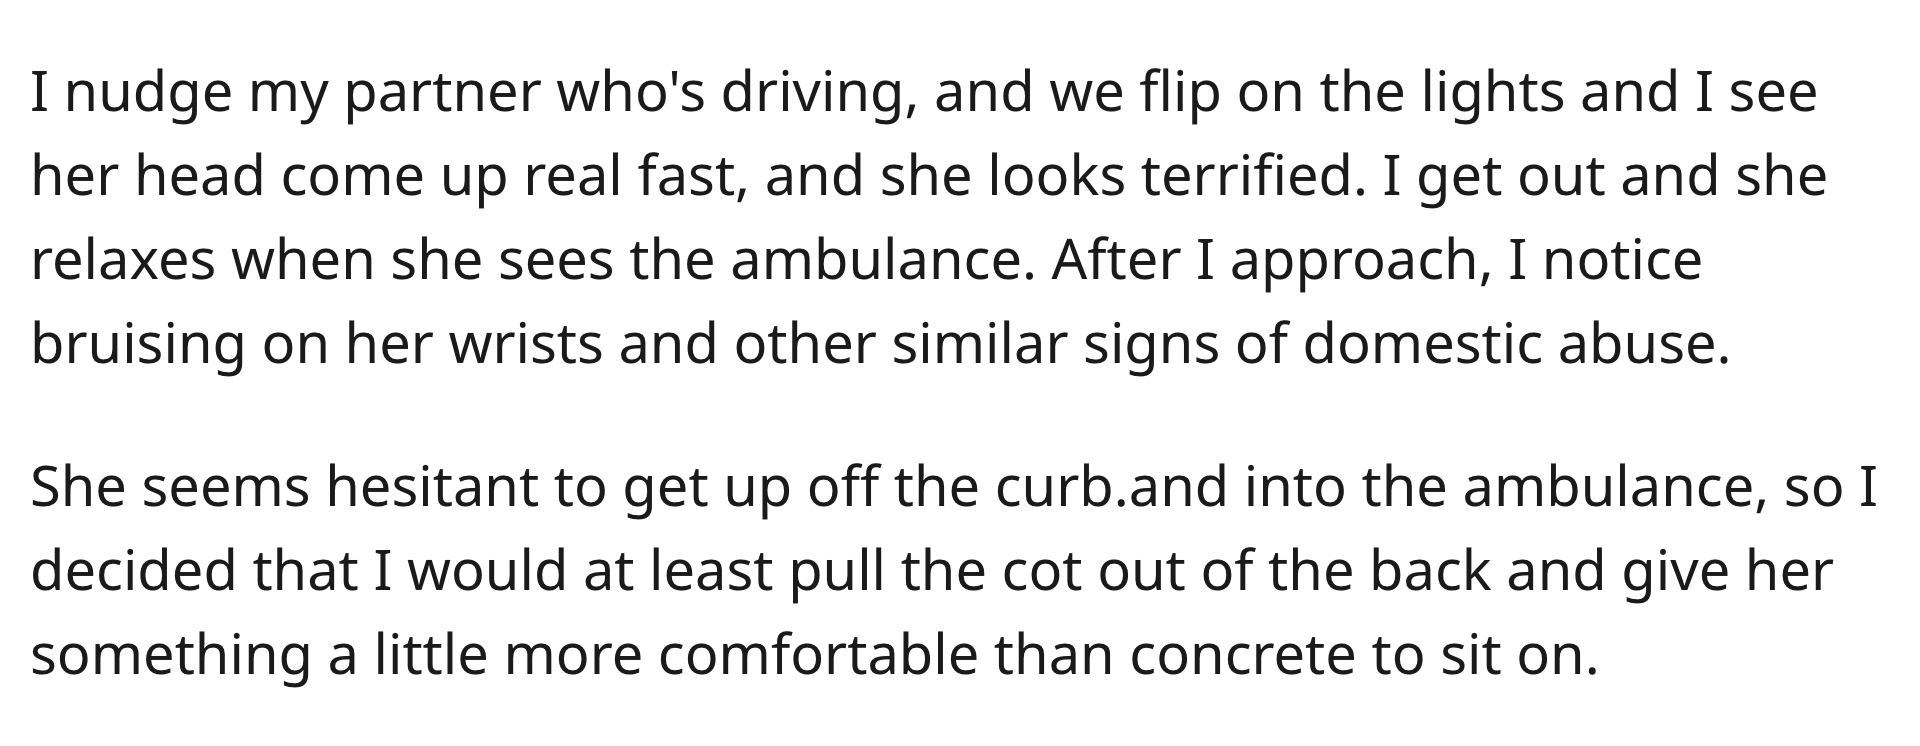 EMT Blocks Cop - I nudge my partner who's driving, and we flip on the lights and I see her head come up real fast, and she looks terrified. I get out and she relaxes when she sees the ambulance. After I approach, I notice bruising on her wrists and other 